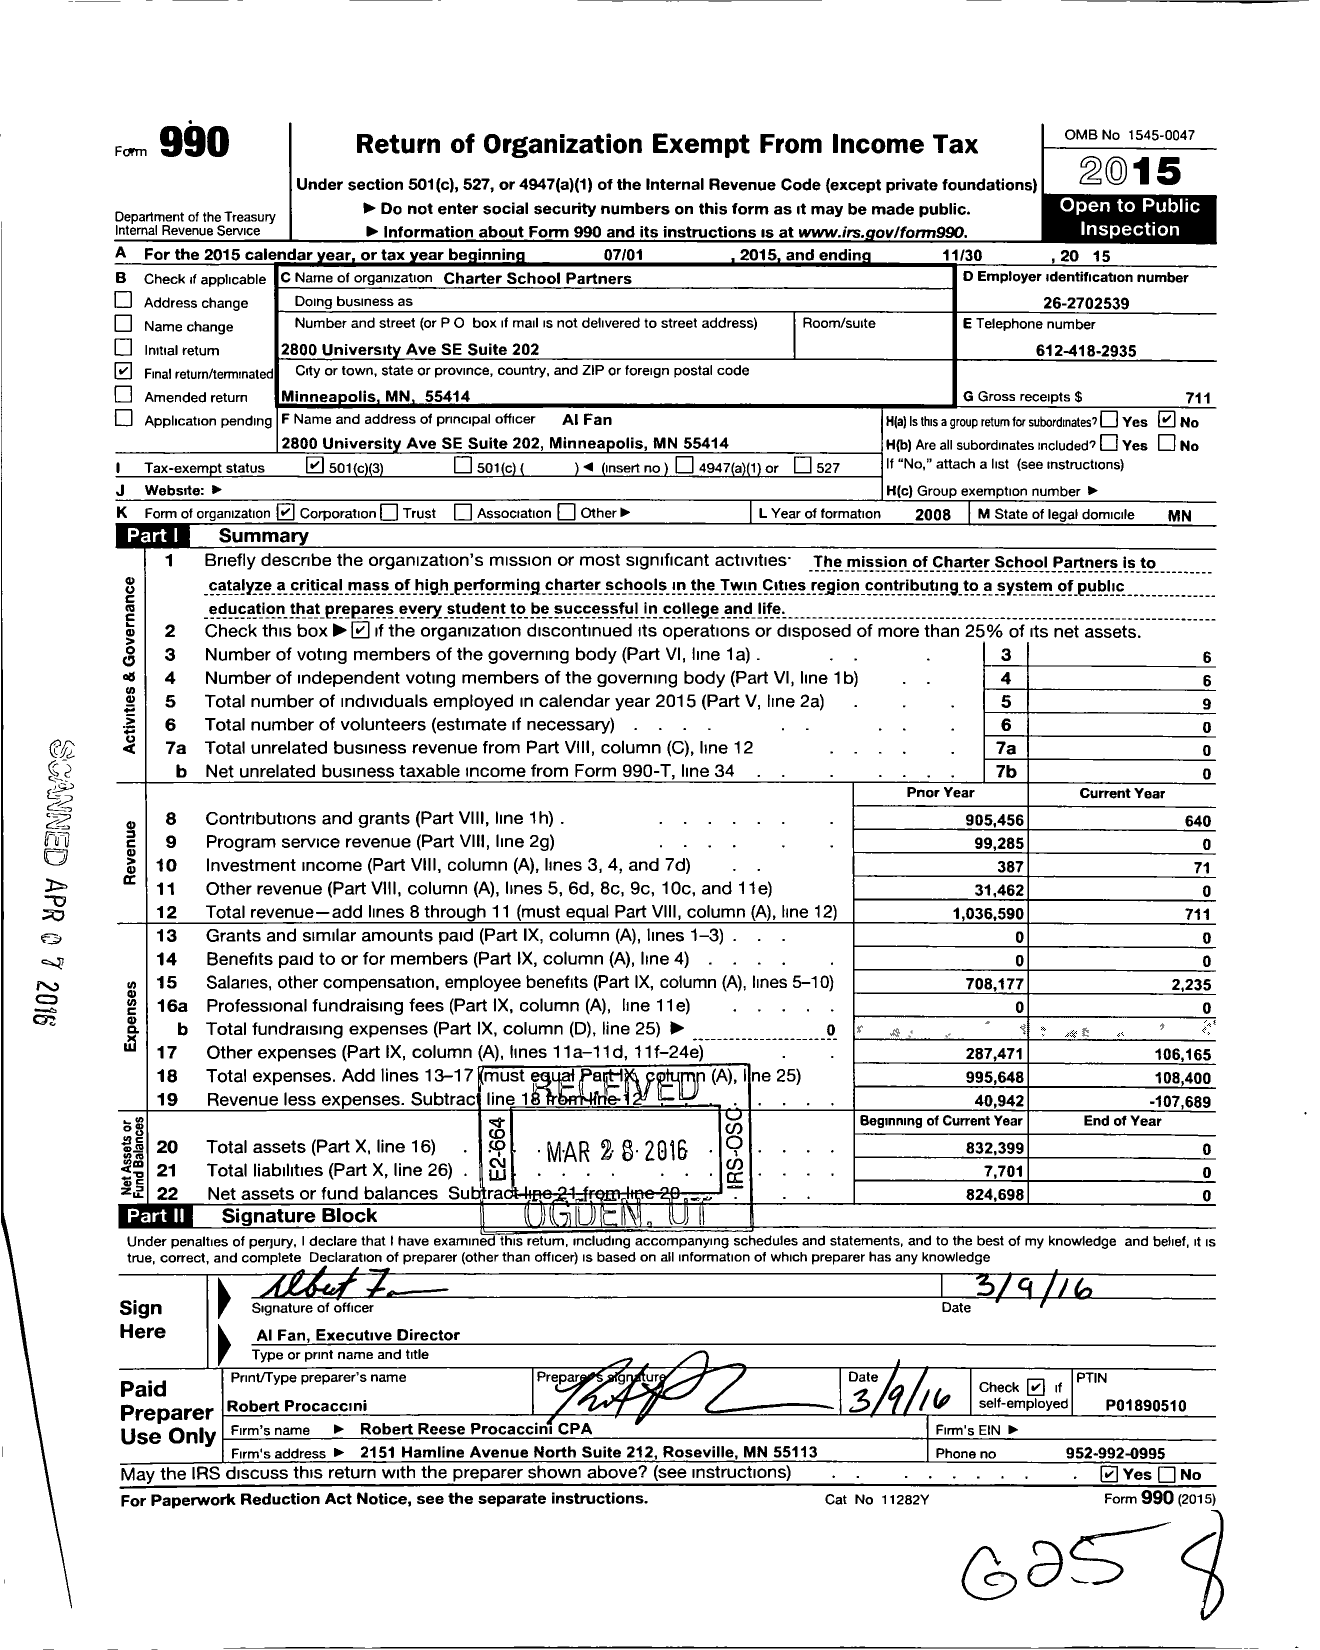 Image of first page of 2014 Form 990 for Charter School Partners